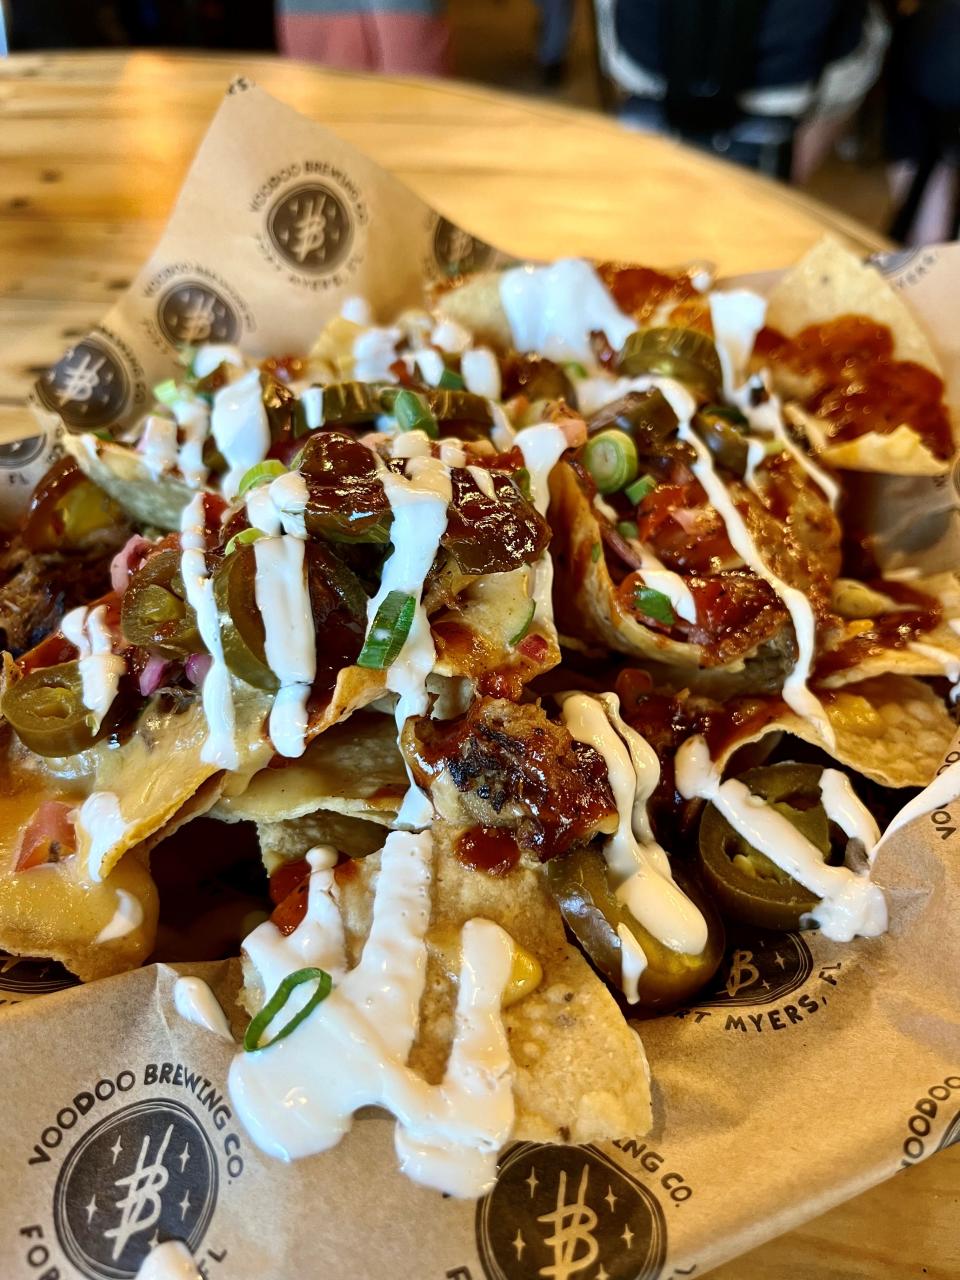 Voodoo's signature nachos come with fresh fried corn tortilla chips, Good Vibes beer cheese, BBQ, lime crema, jalapeños, cilantro, and house pico.